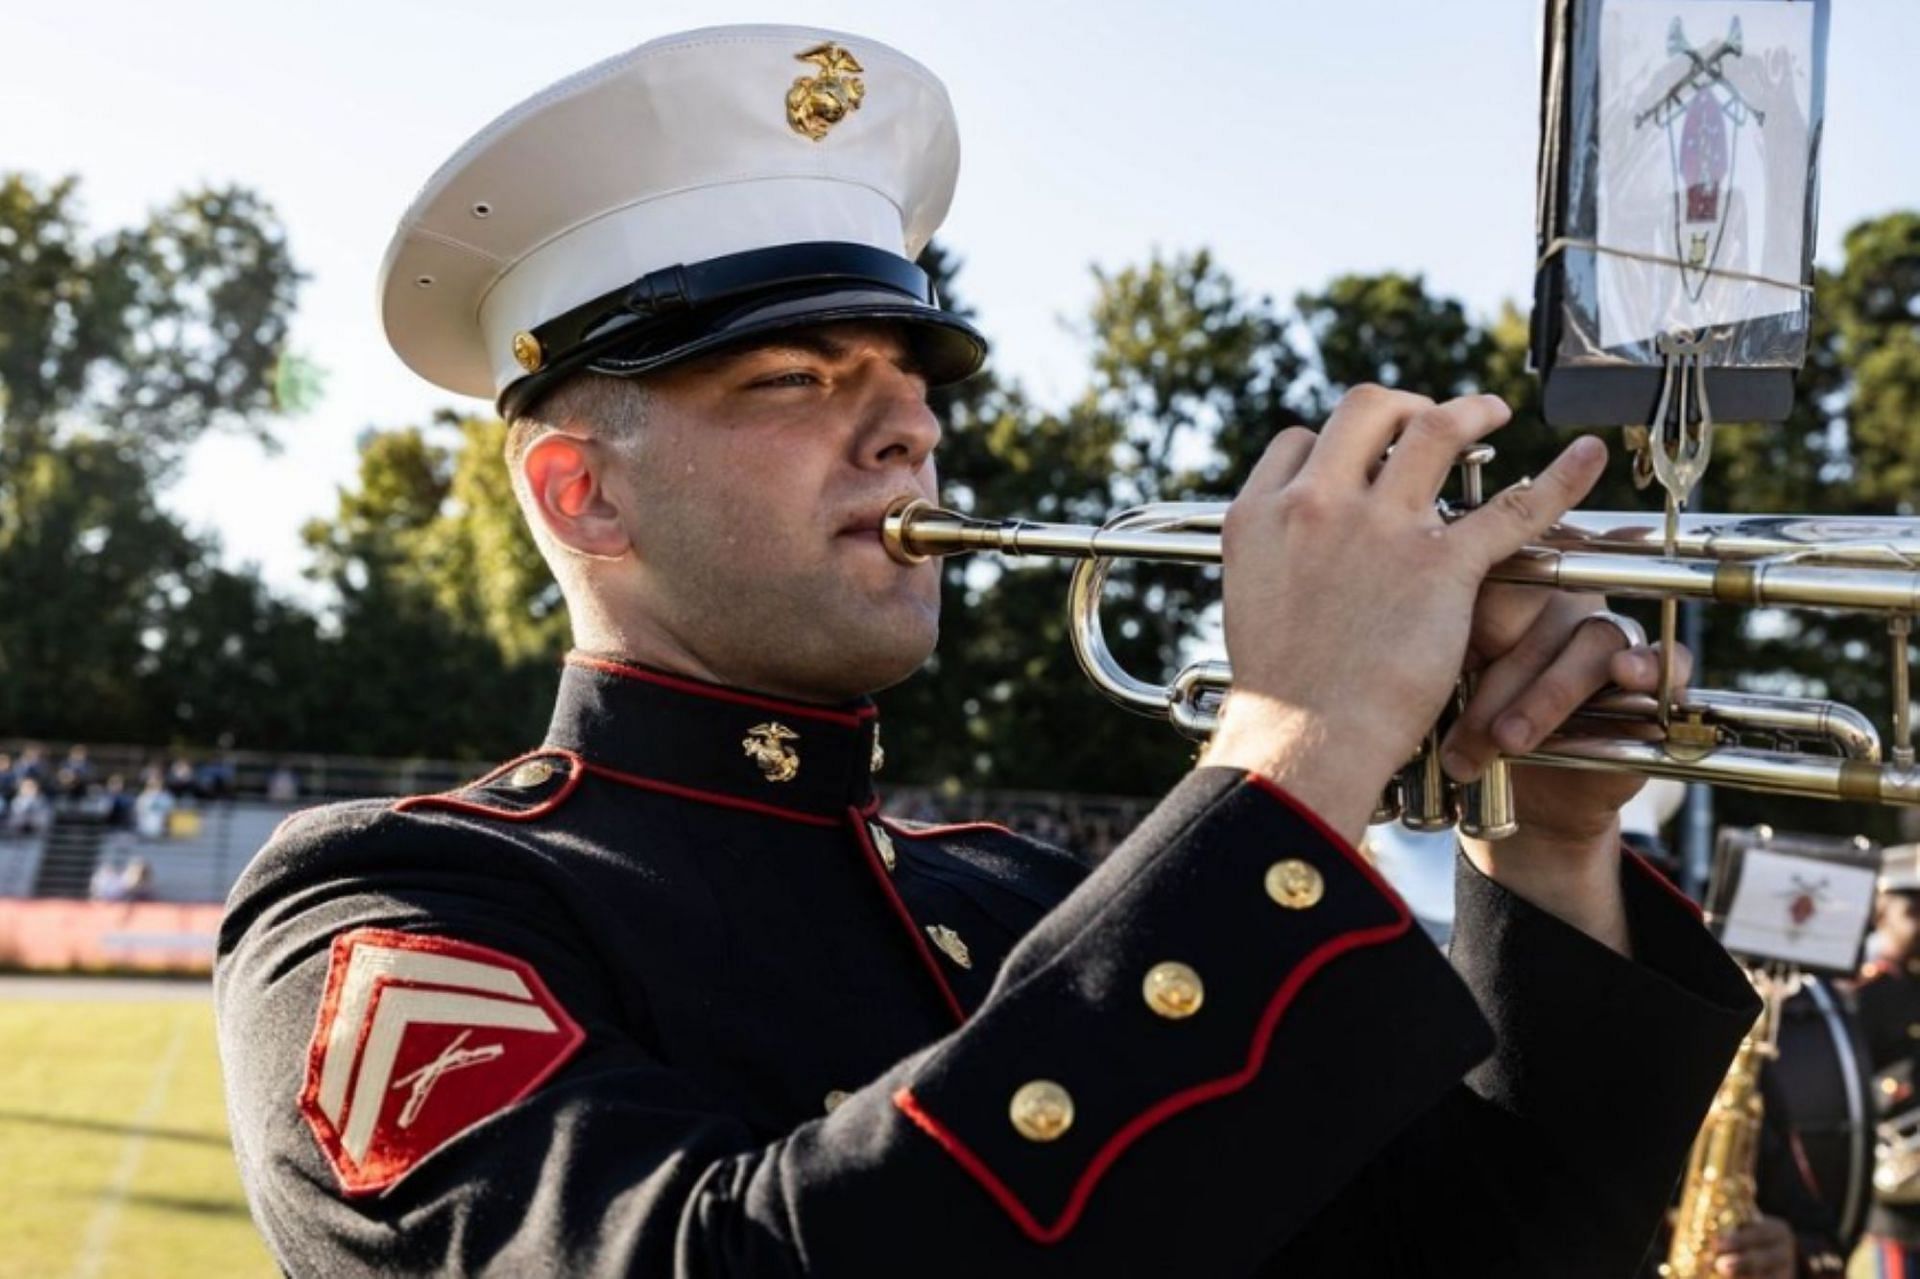 Why was the Marine Corps ball canceled by Central Command? Decision